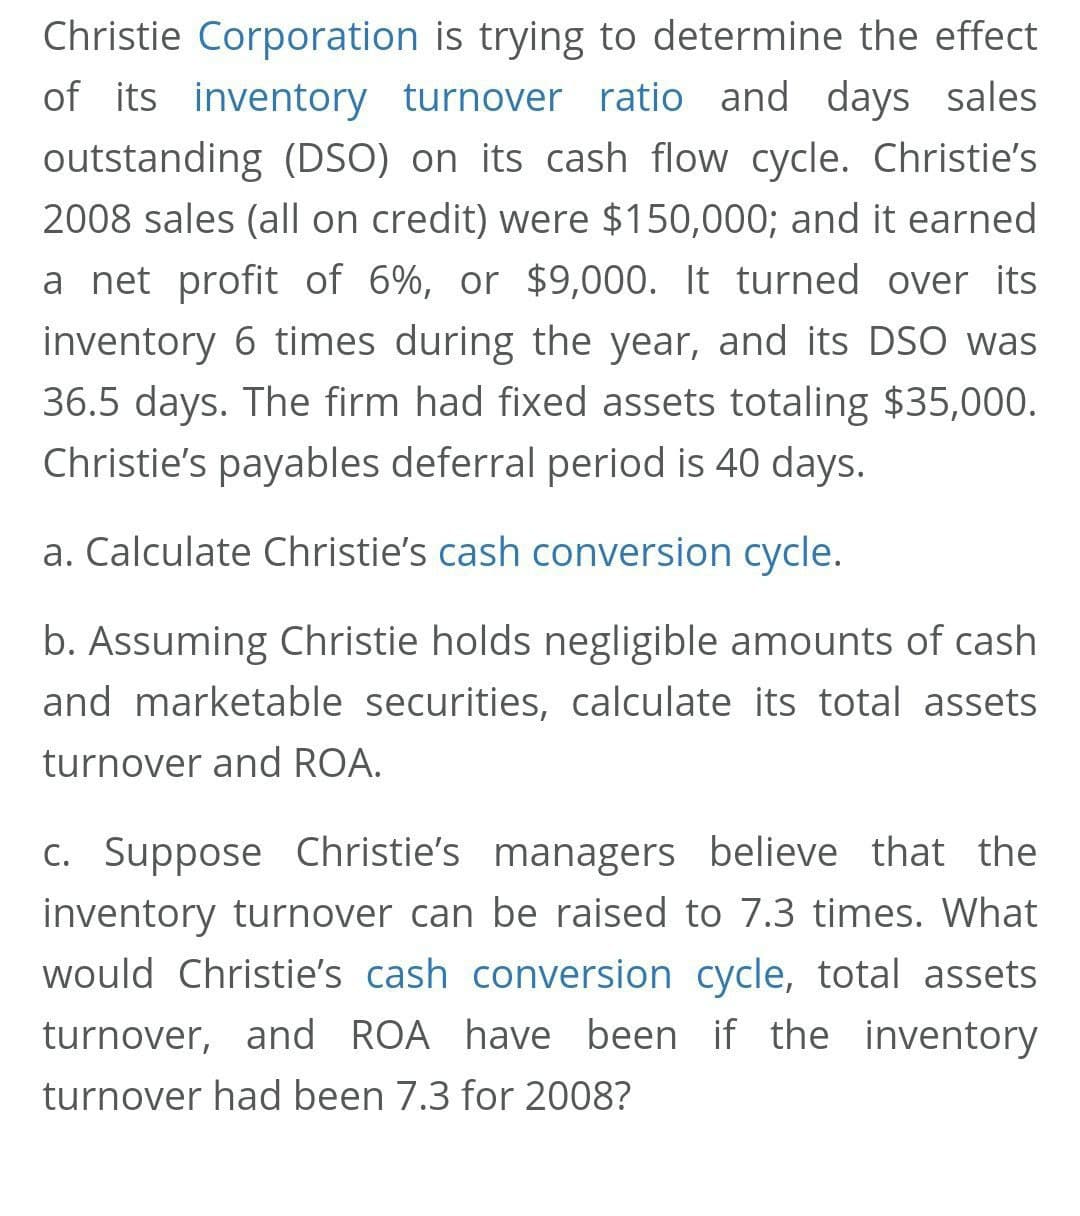 Christie Corporation is trying to determine the effect
of its inventory turnover ratio and days sales
outstanding (DSO) on its cash flow cycle. Christie's
2008 sales (all on credit) were $150,000; and it earned
a net profit of 6%, or $9,000. It turned over its
inventory 6 times during the year, and its DSO was
36.5 days. The firm had fixed assets totaling $35,000.
Christie's payables deferral period is 40 days.
a. Calculate Christie's cash conversion cycle.
b. Assuming Christie holds negligible amounts of cash
and marketable securities, calculate its total assets
turnover and ROA.
C. Suppose Christie's managers believe that the
inventory turnover can be raised to 7.3 times. What
would Christie's cash conversion cycle, total assets
turnover, and ROA have been if the inventory
turnover had been 7.3 for 2008?
